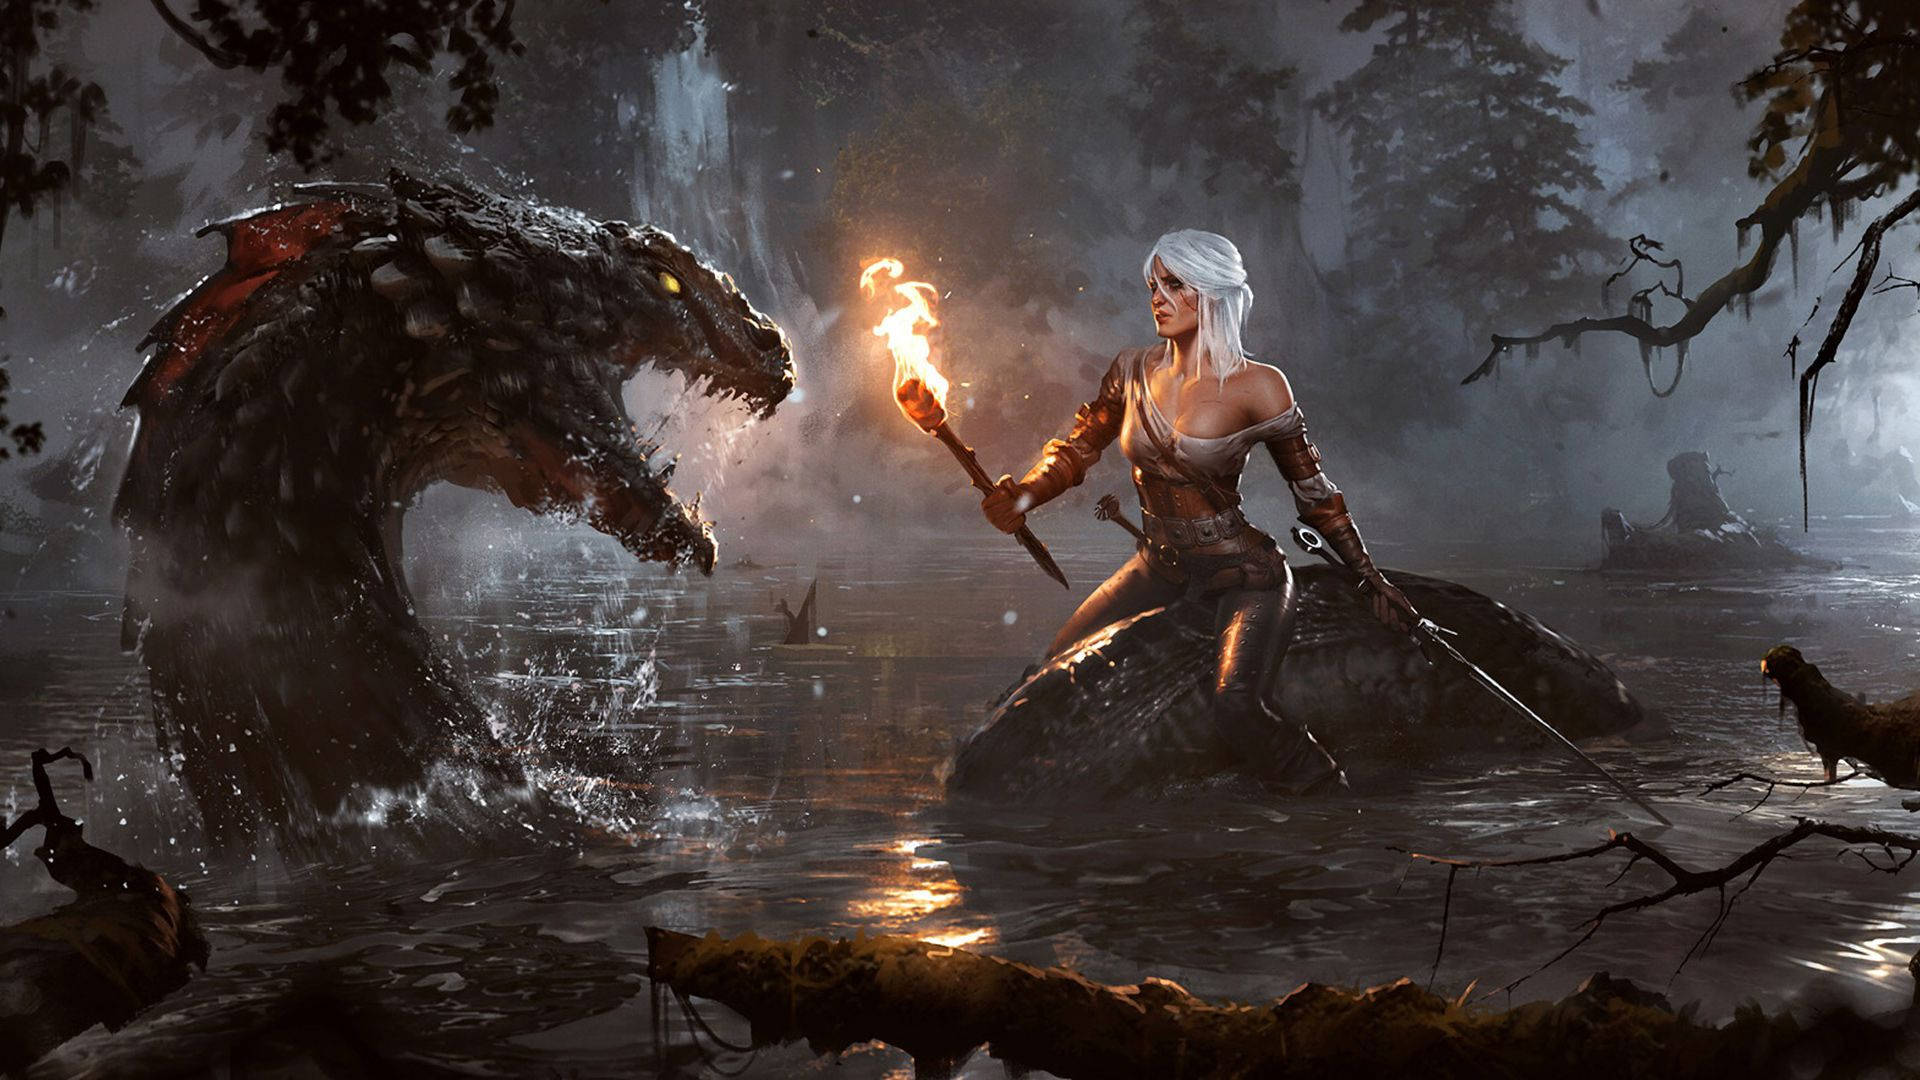 The Witcher 3 Wild Hunt Wallpaper, Top Beautiful The Witcher 3 Wild